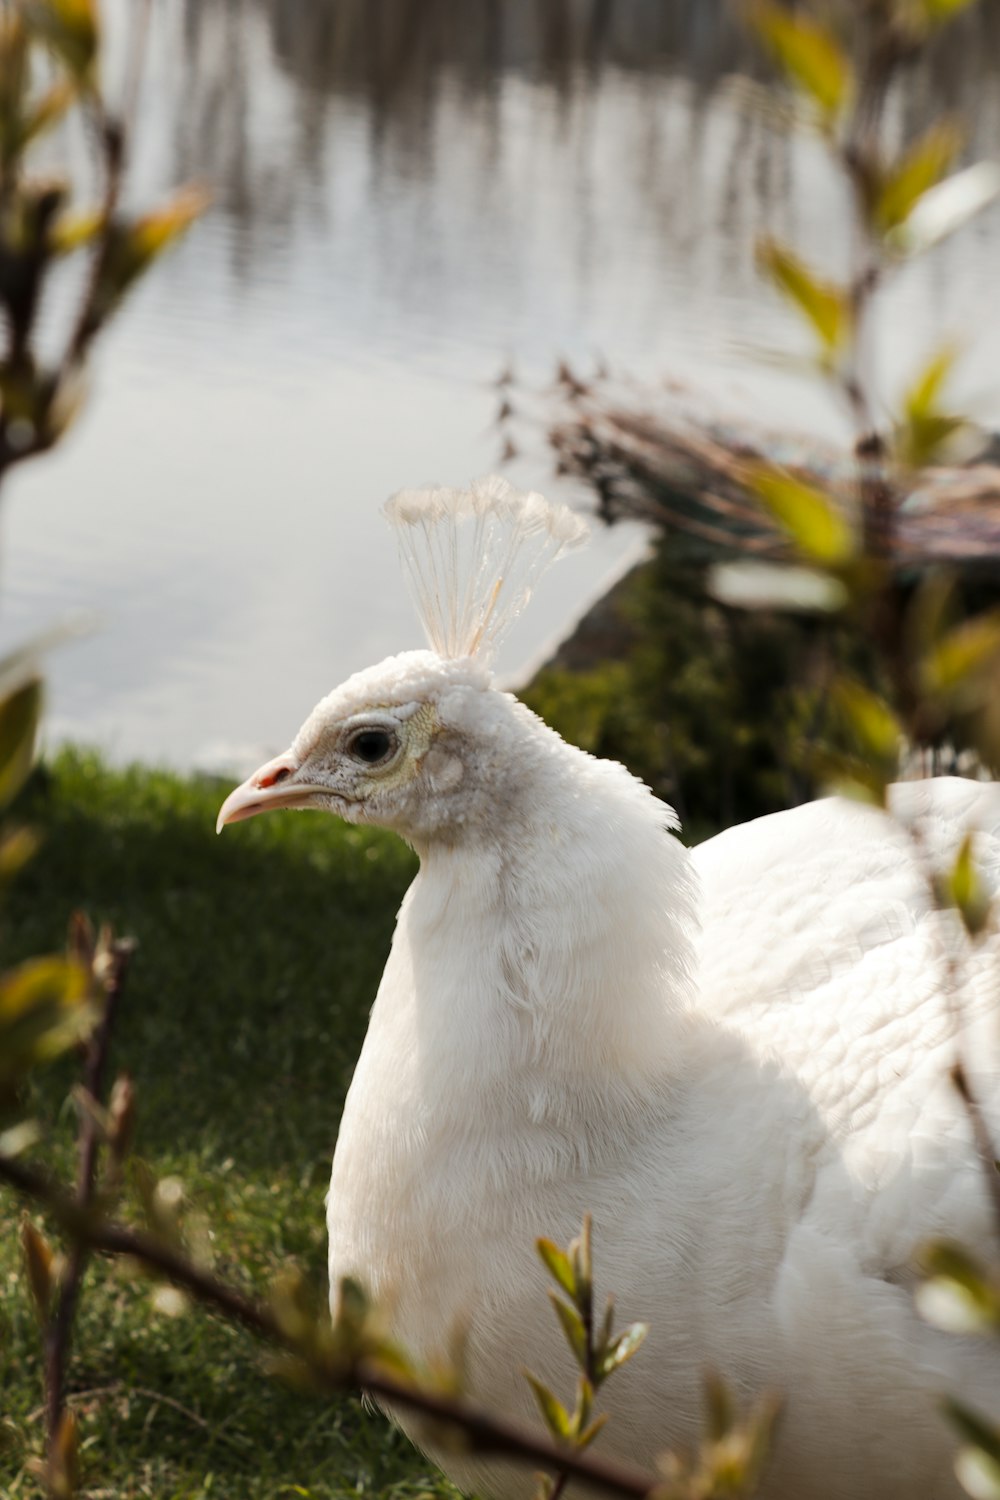 a white bird standing in the grass next to a body of water